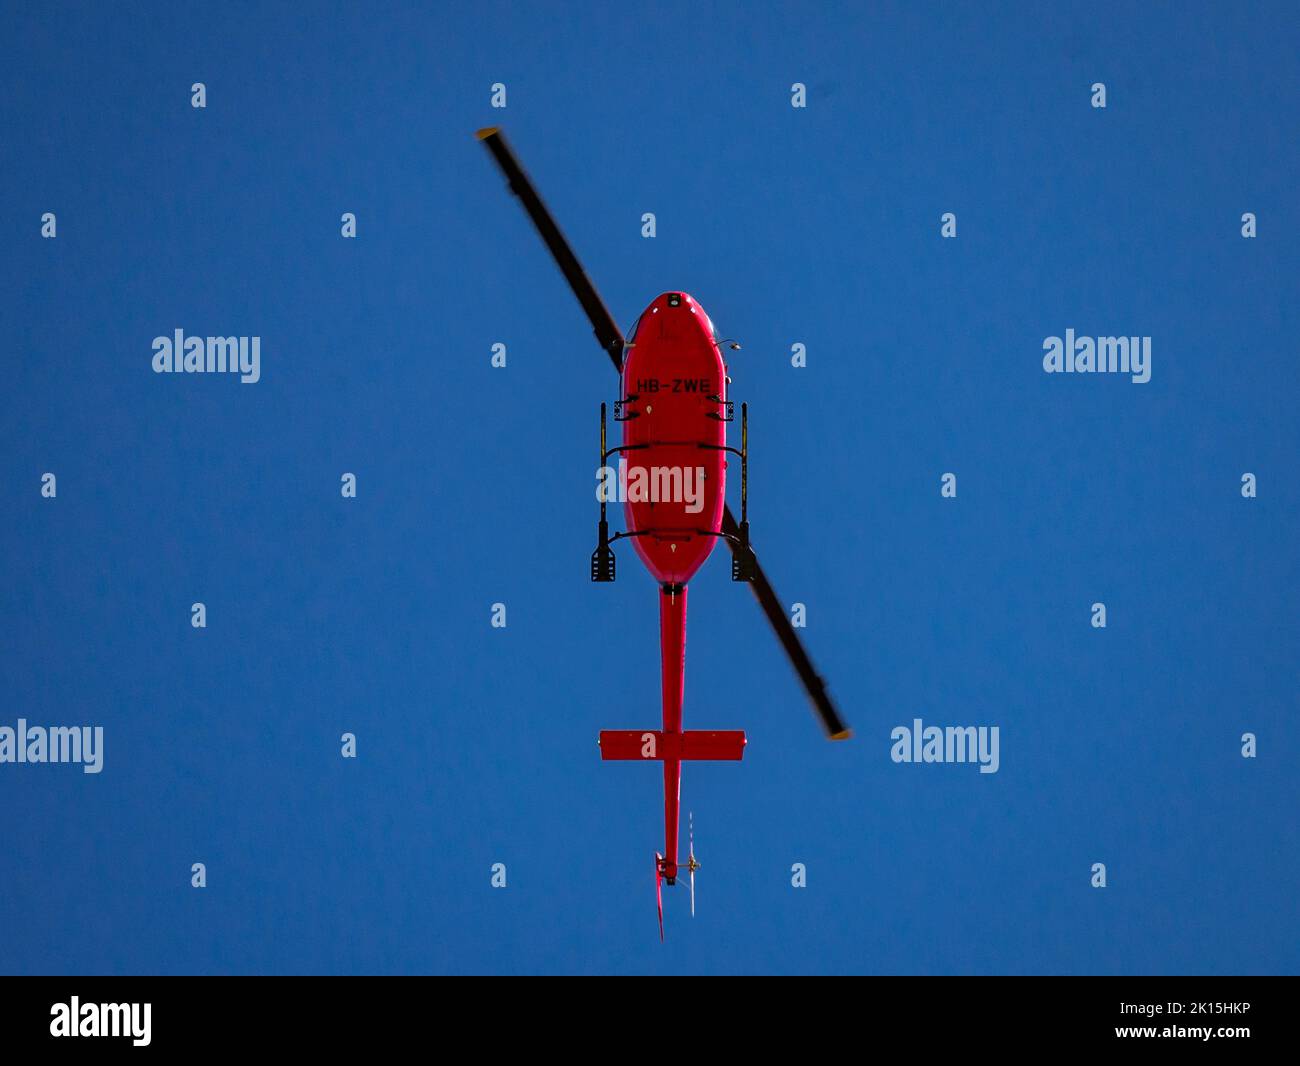 Red helicopter flying into action. Stock Photo